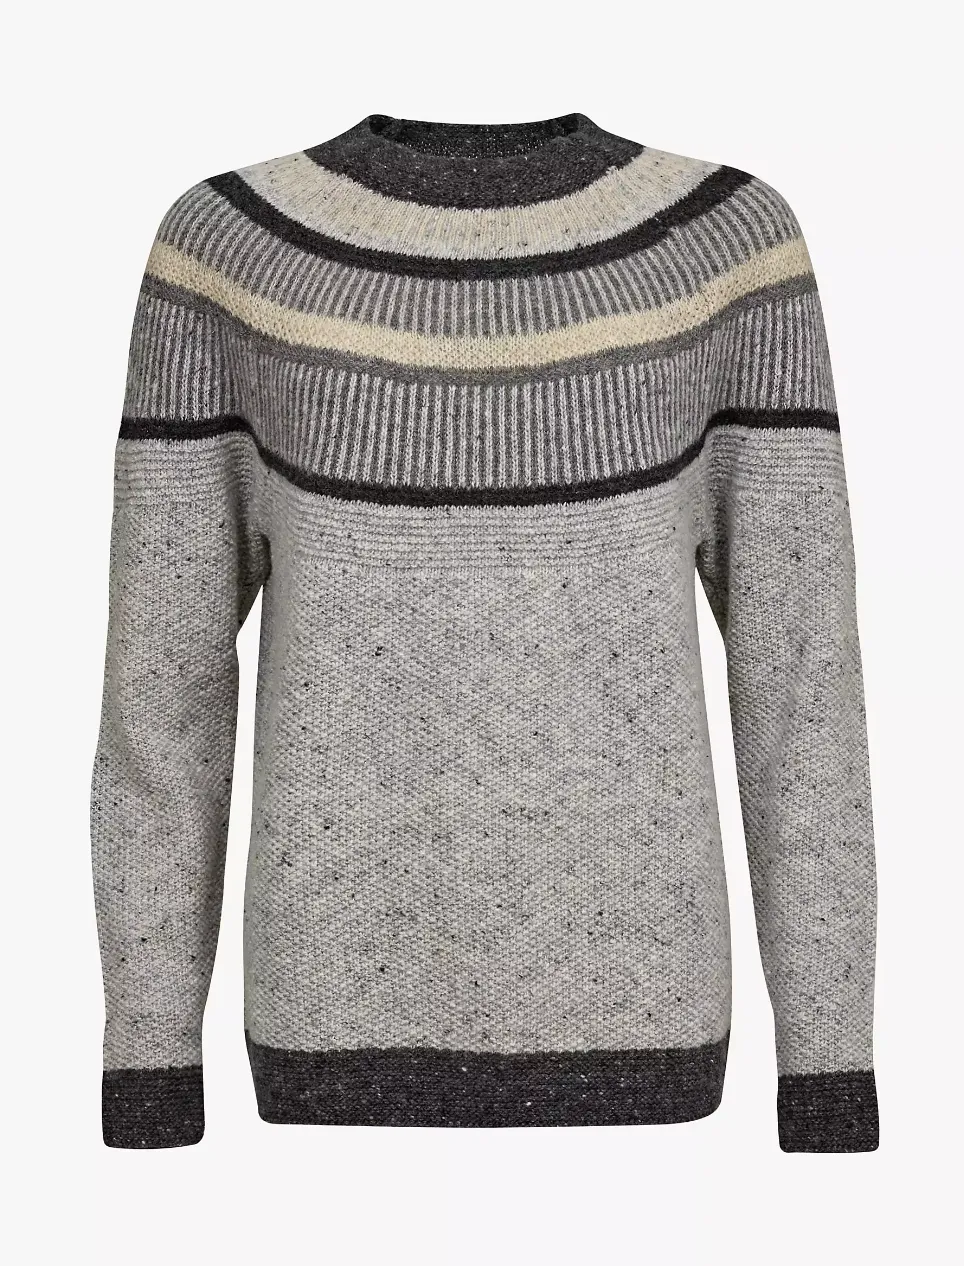 Celtic & Co. Statement Donegal Wool Jumper, Fossil